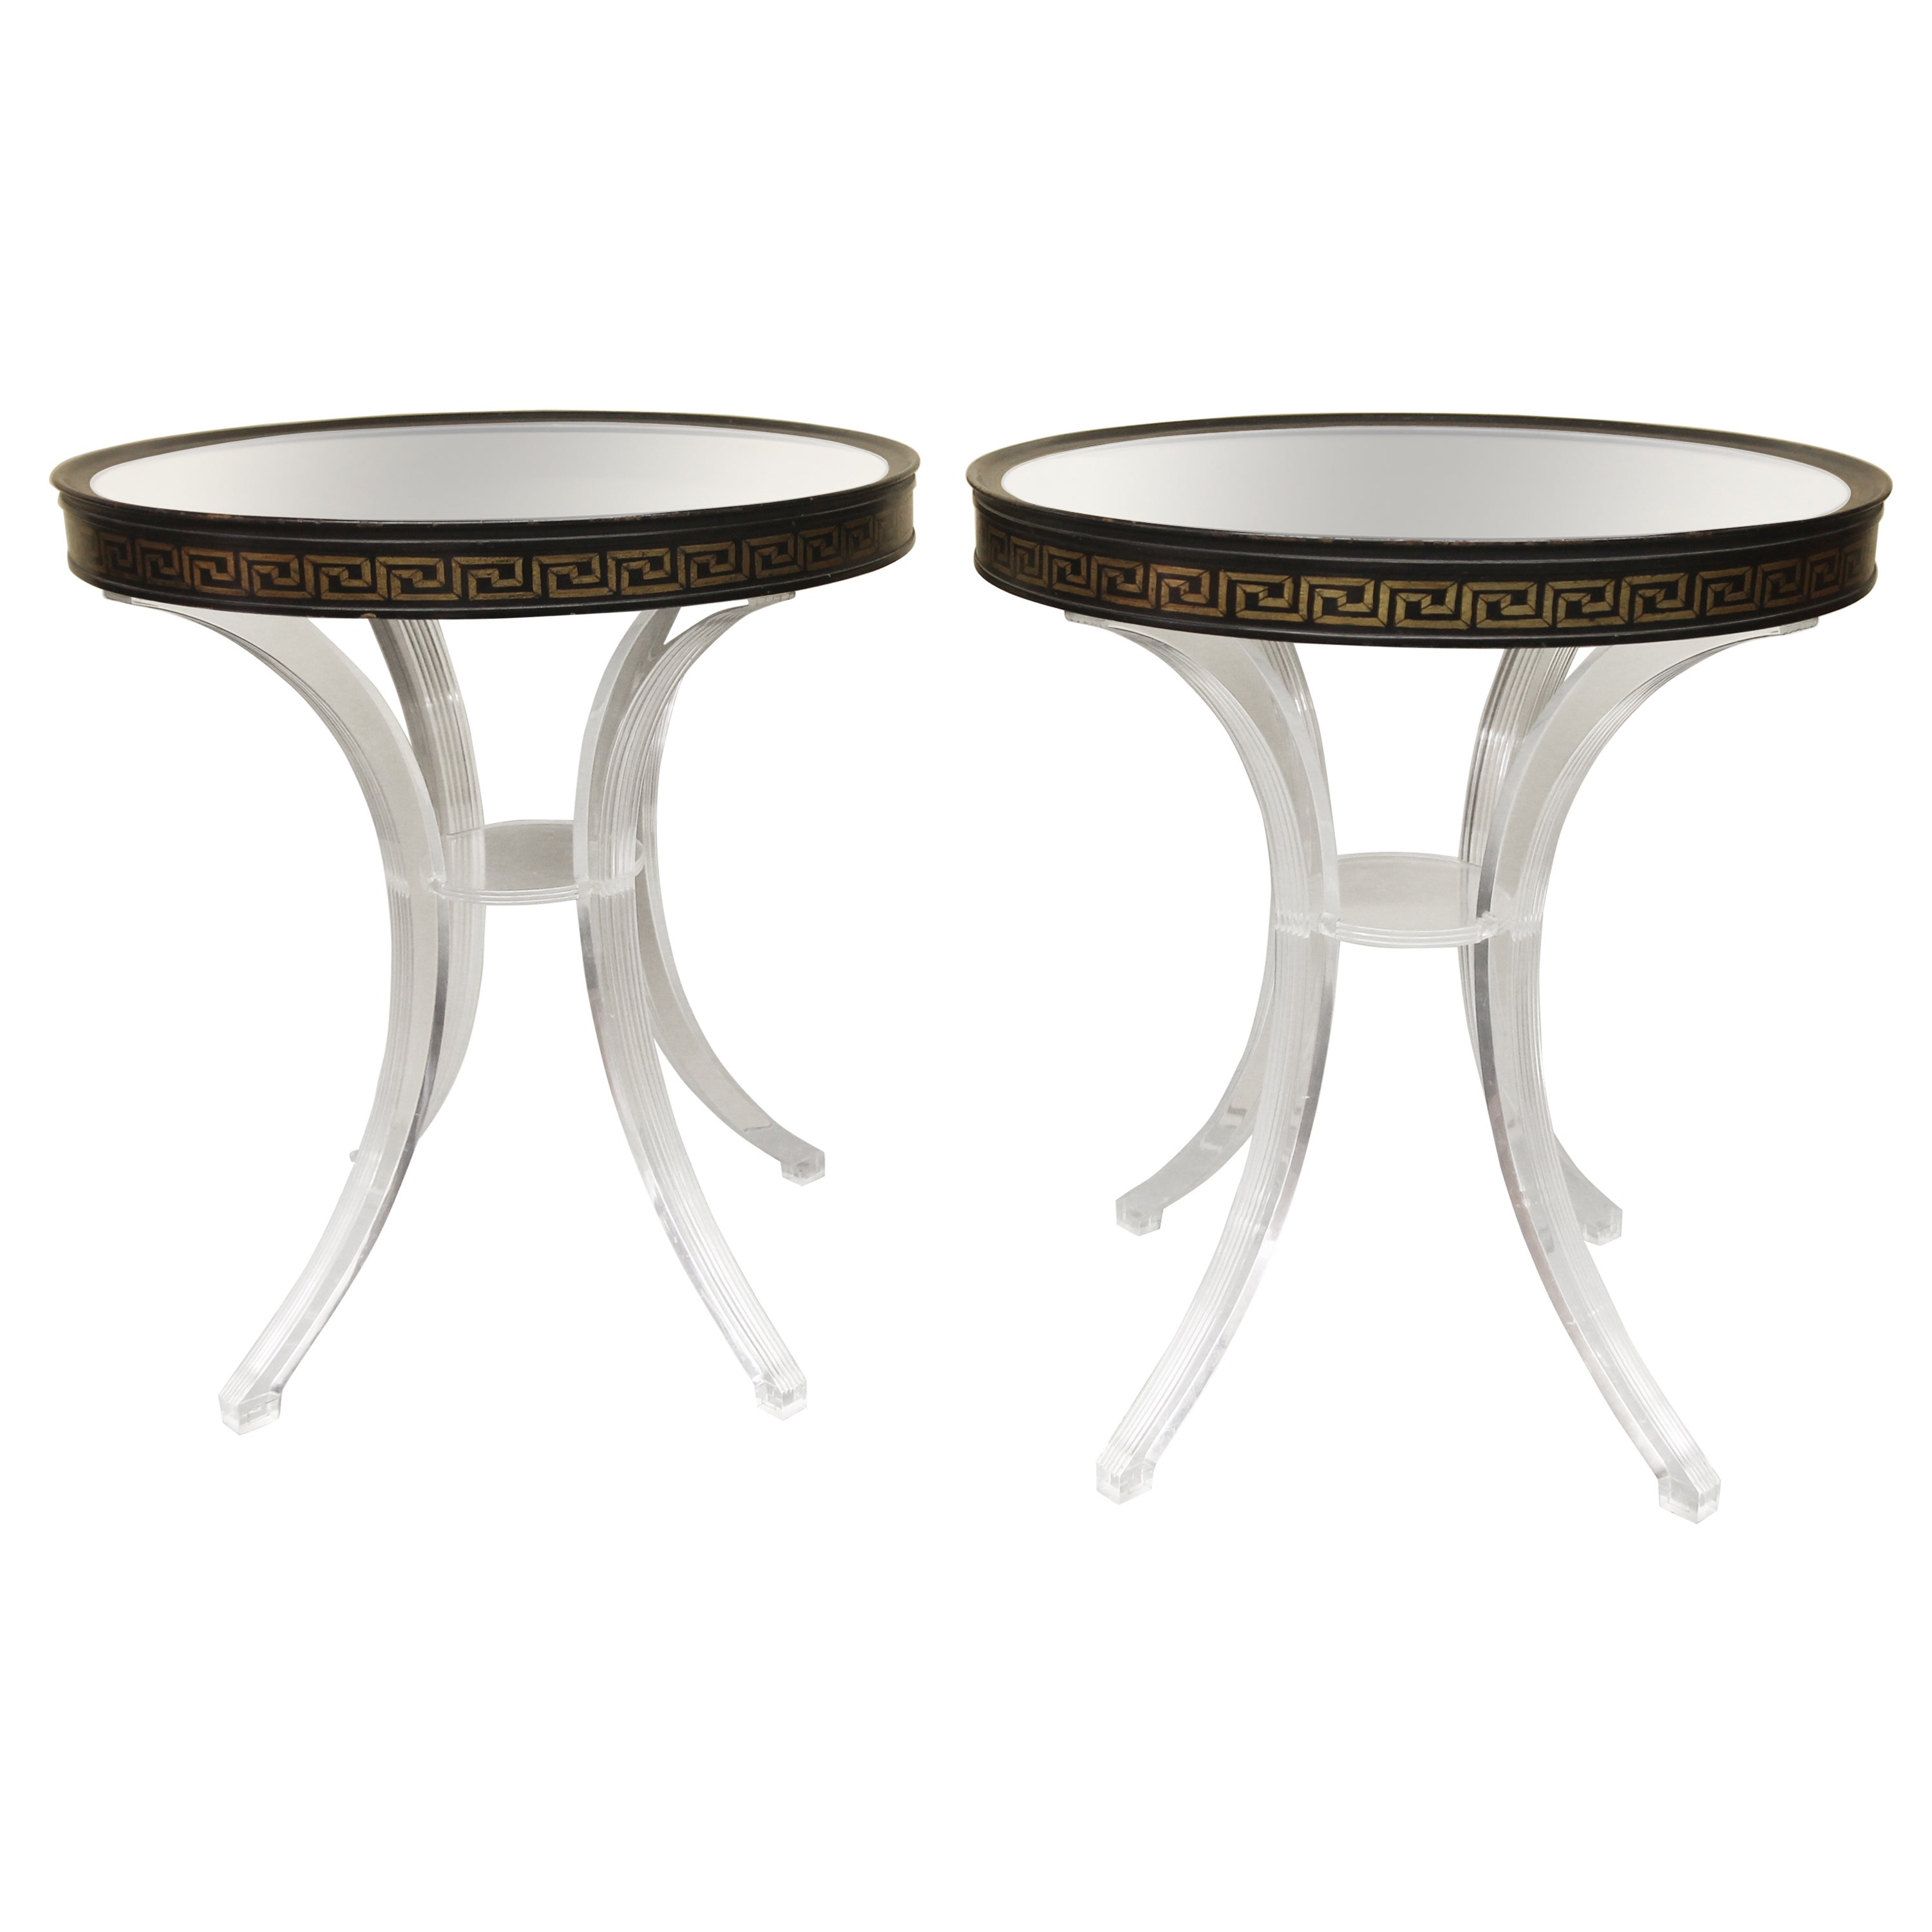 Grosfeld House Side Tables from the 1930's